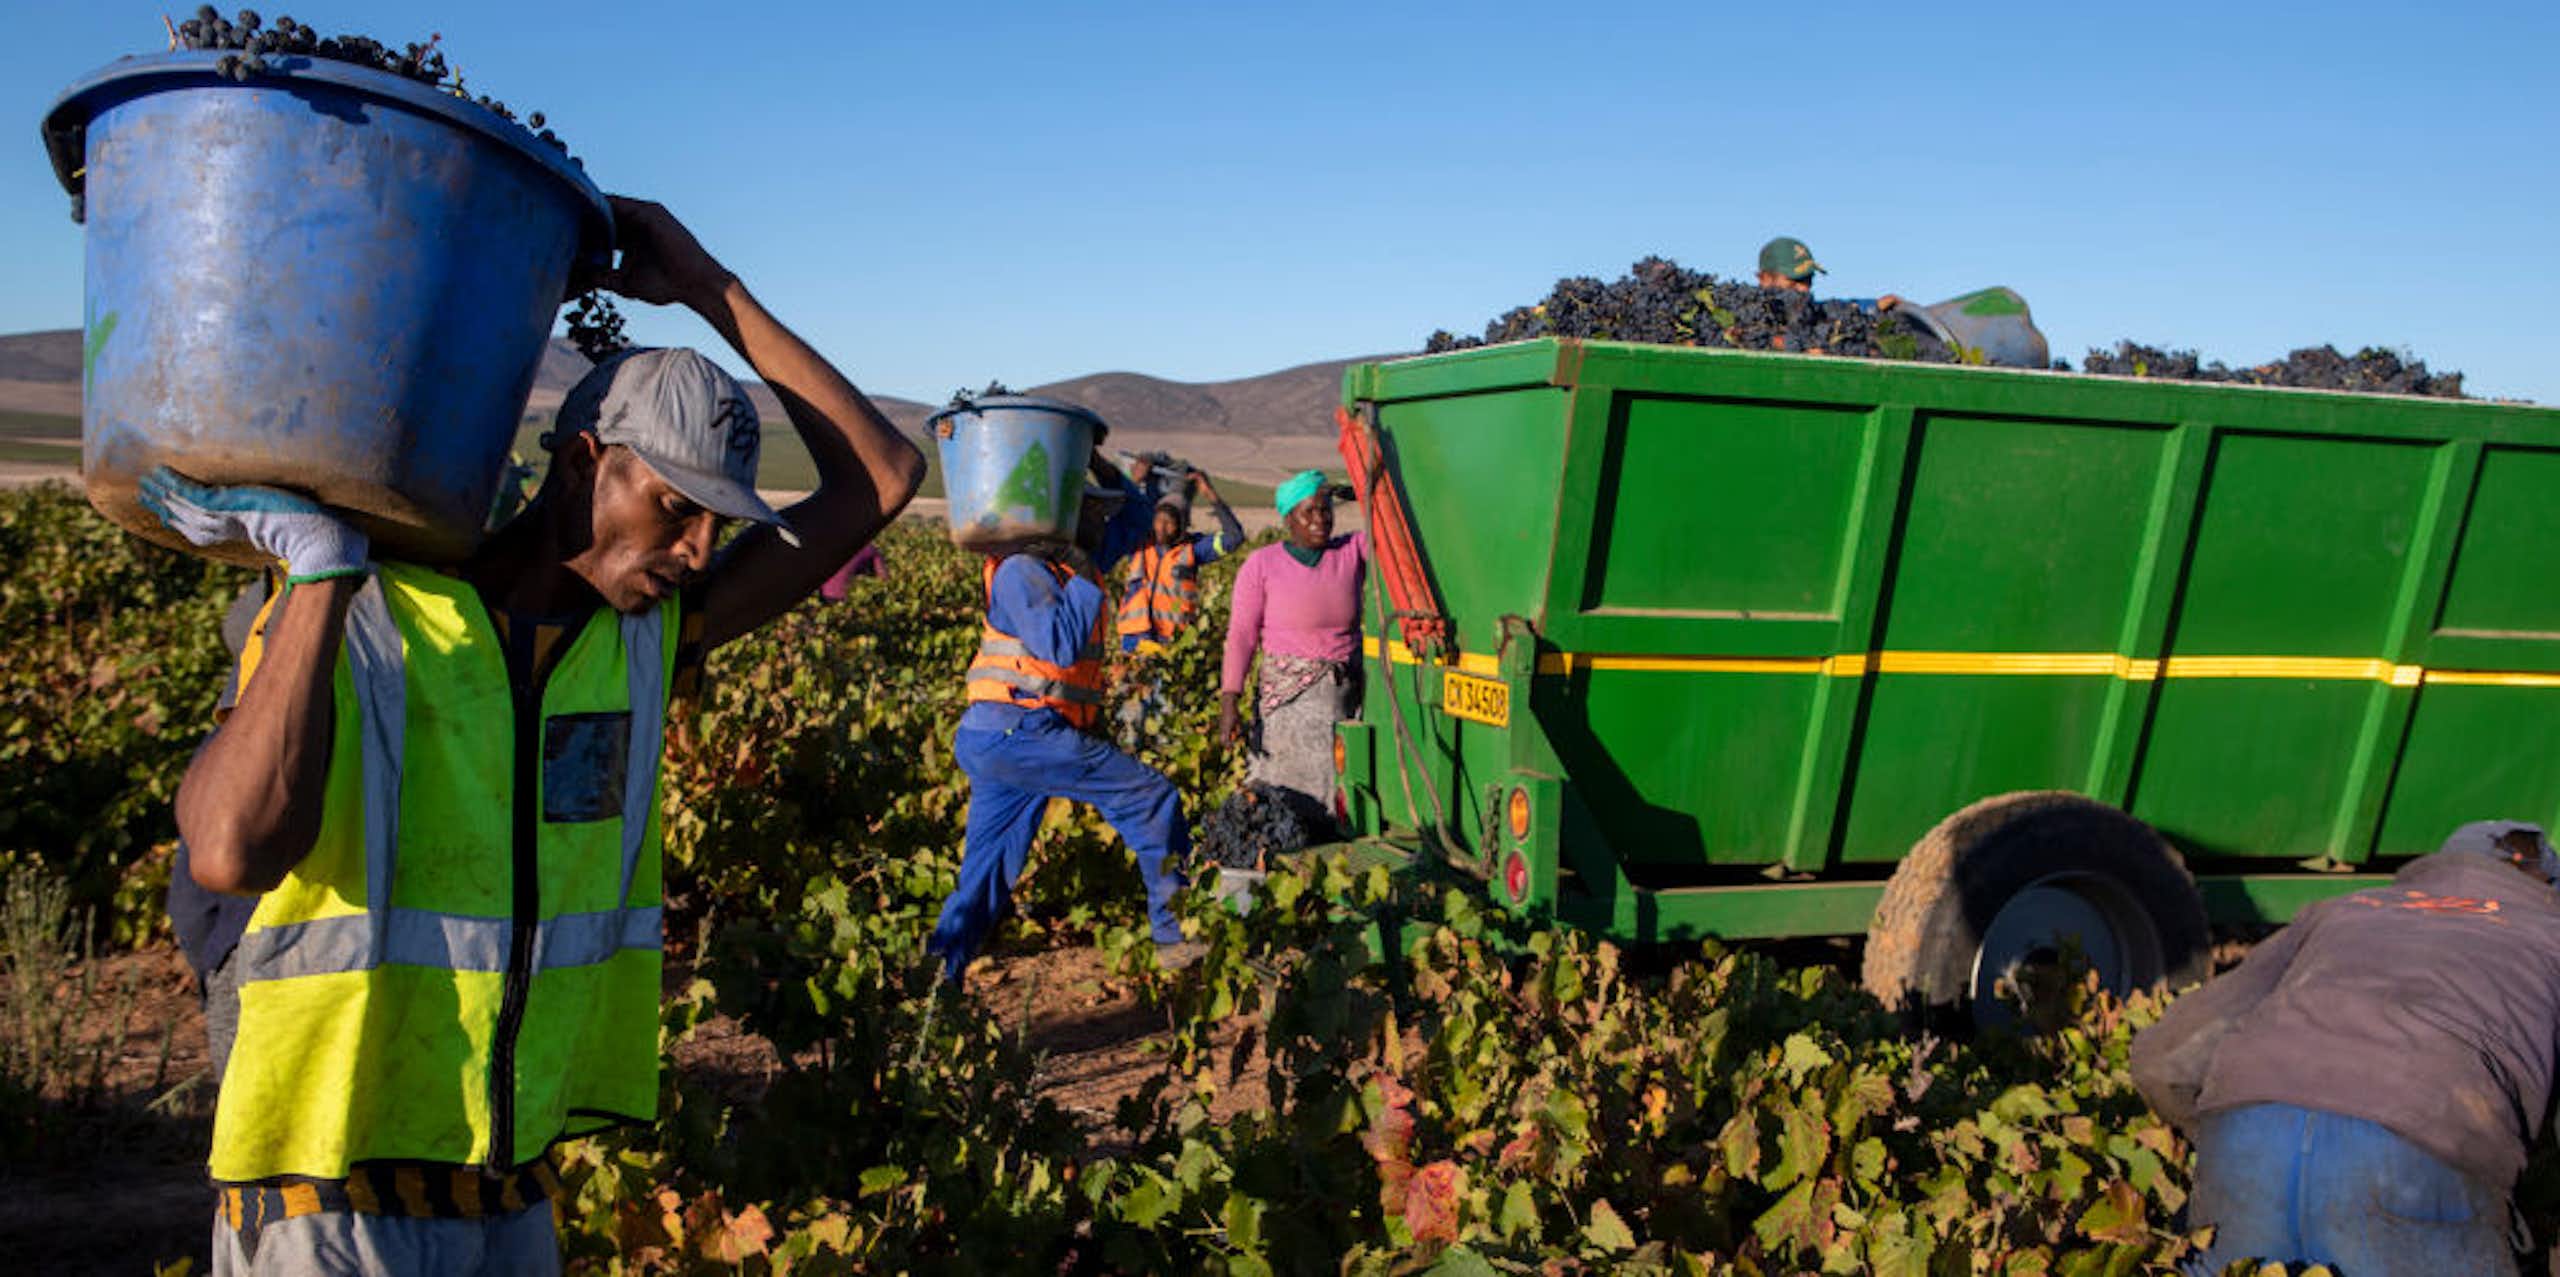 People carry buckets of grapes to a truck in a vineyard.